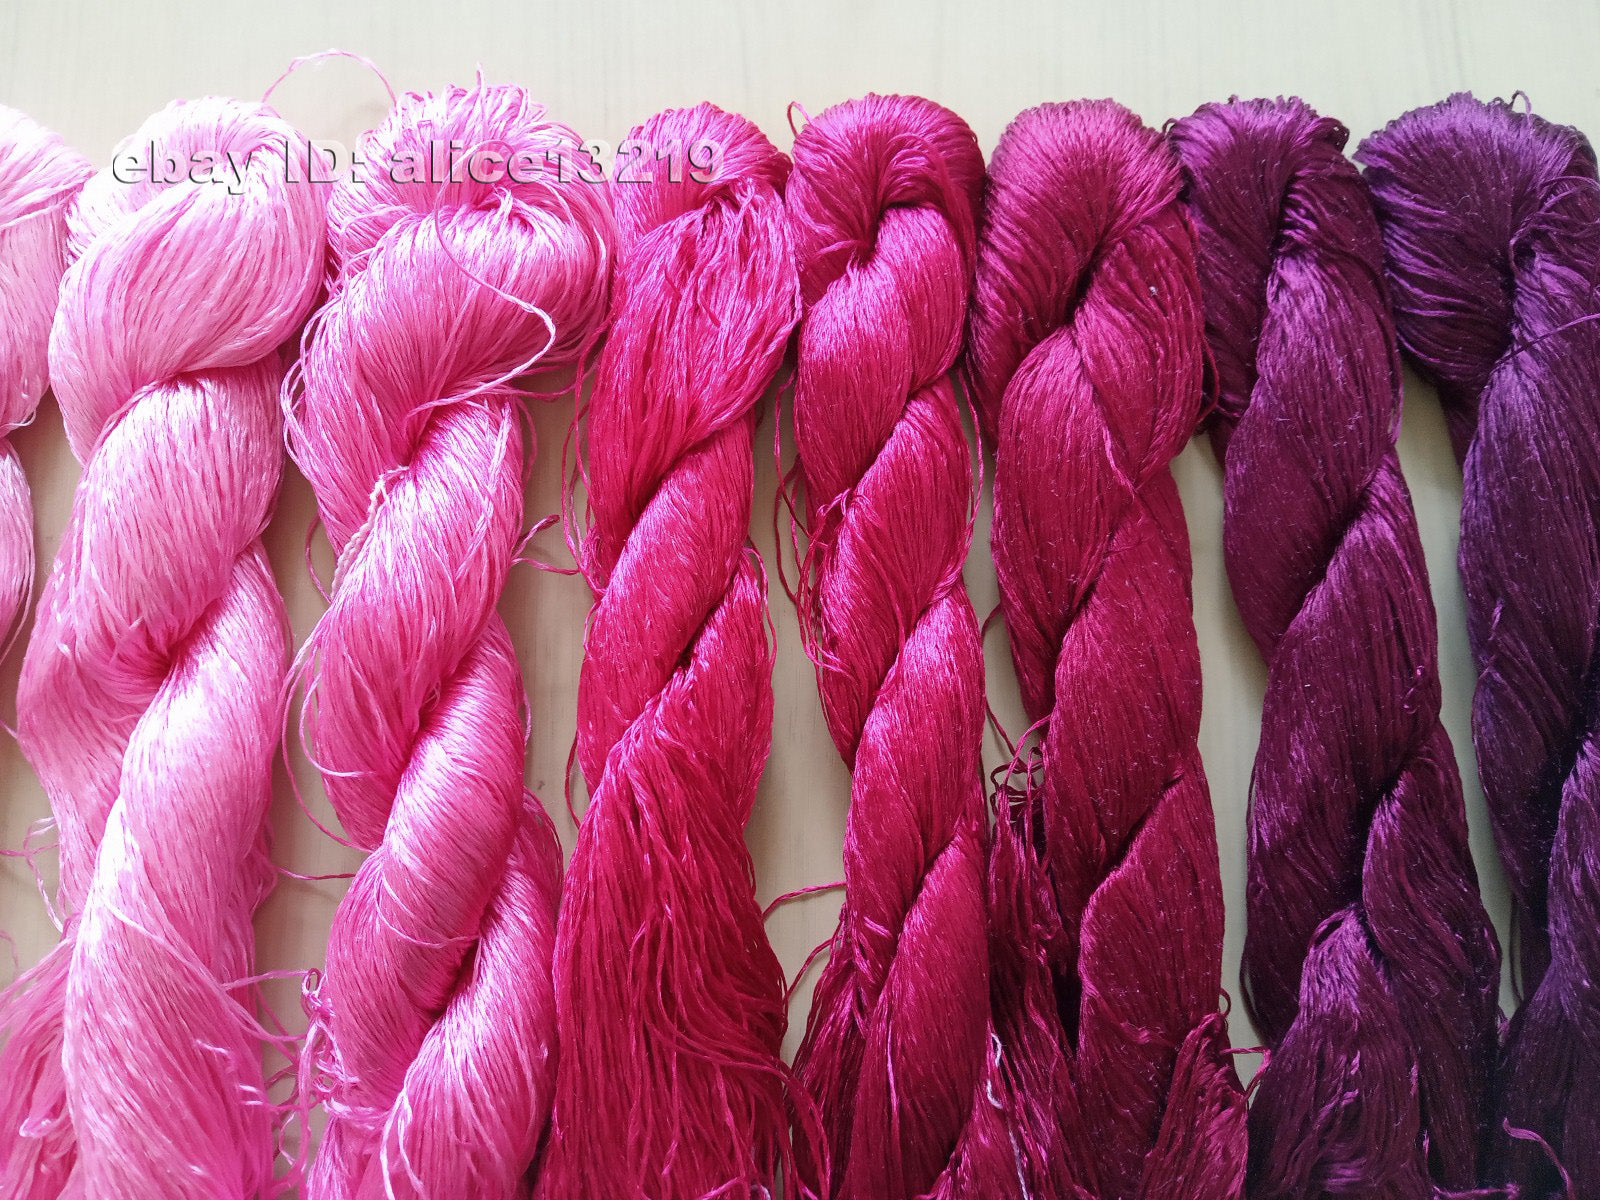 10bundles 100%real mulberry silk,hand-dyed embroidery silk floss/thread N25